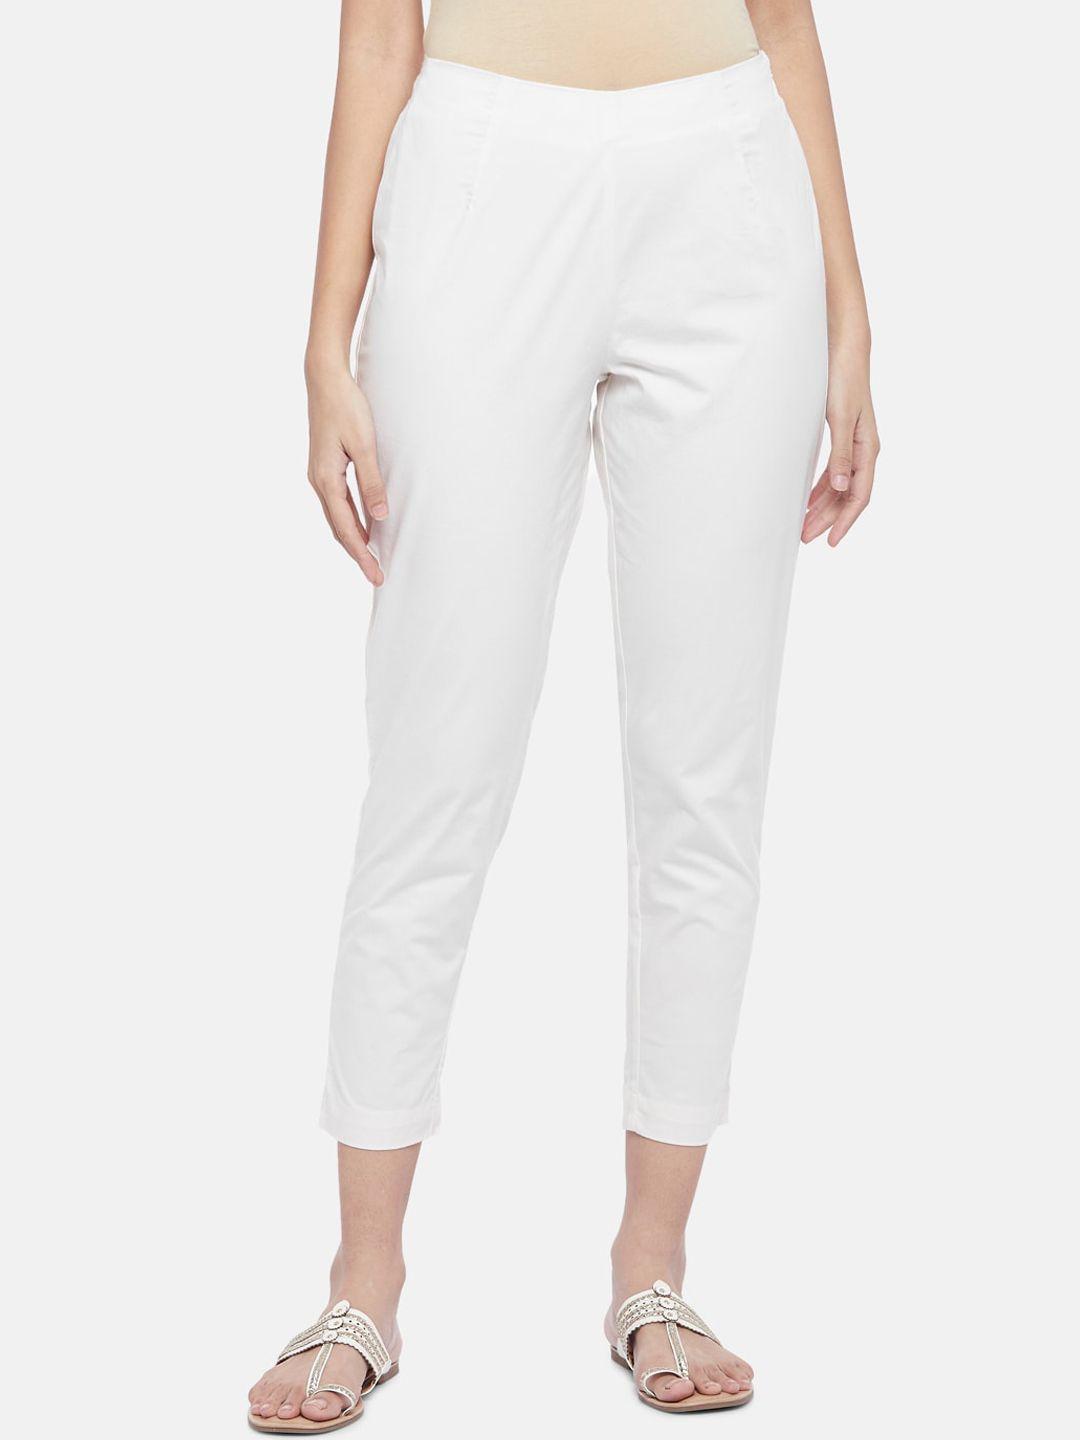 rangmanch-by-pantaloons-women-off-white-solid-pure-cotton-culottes-trousers